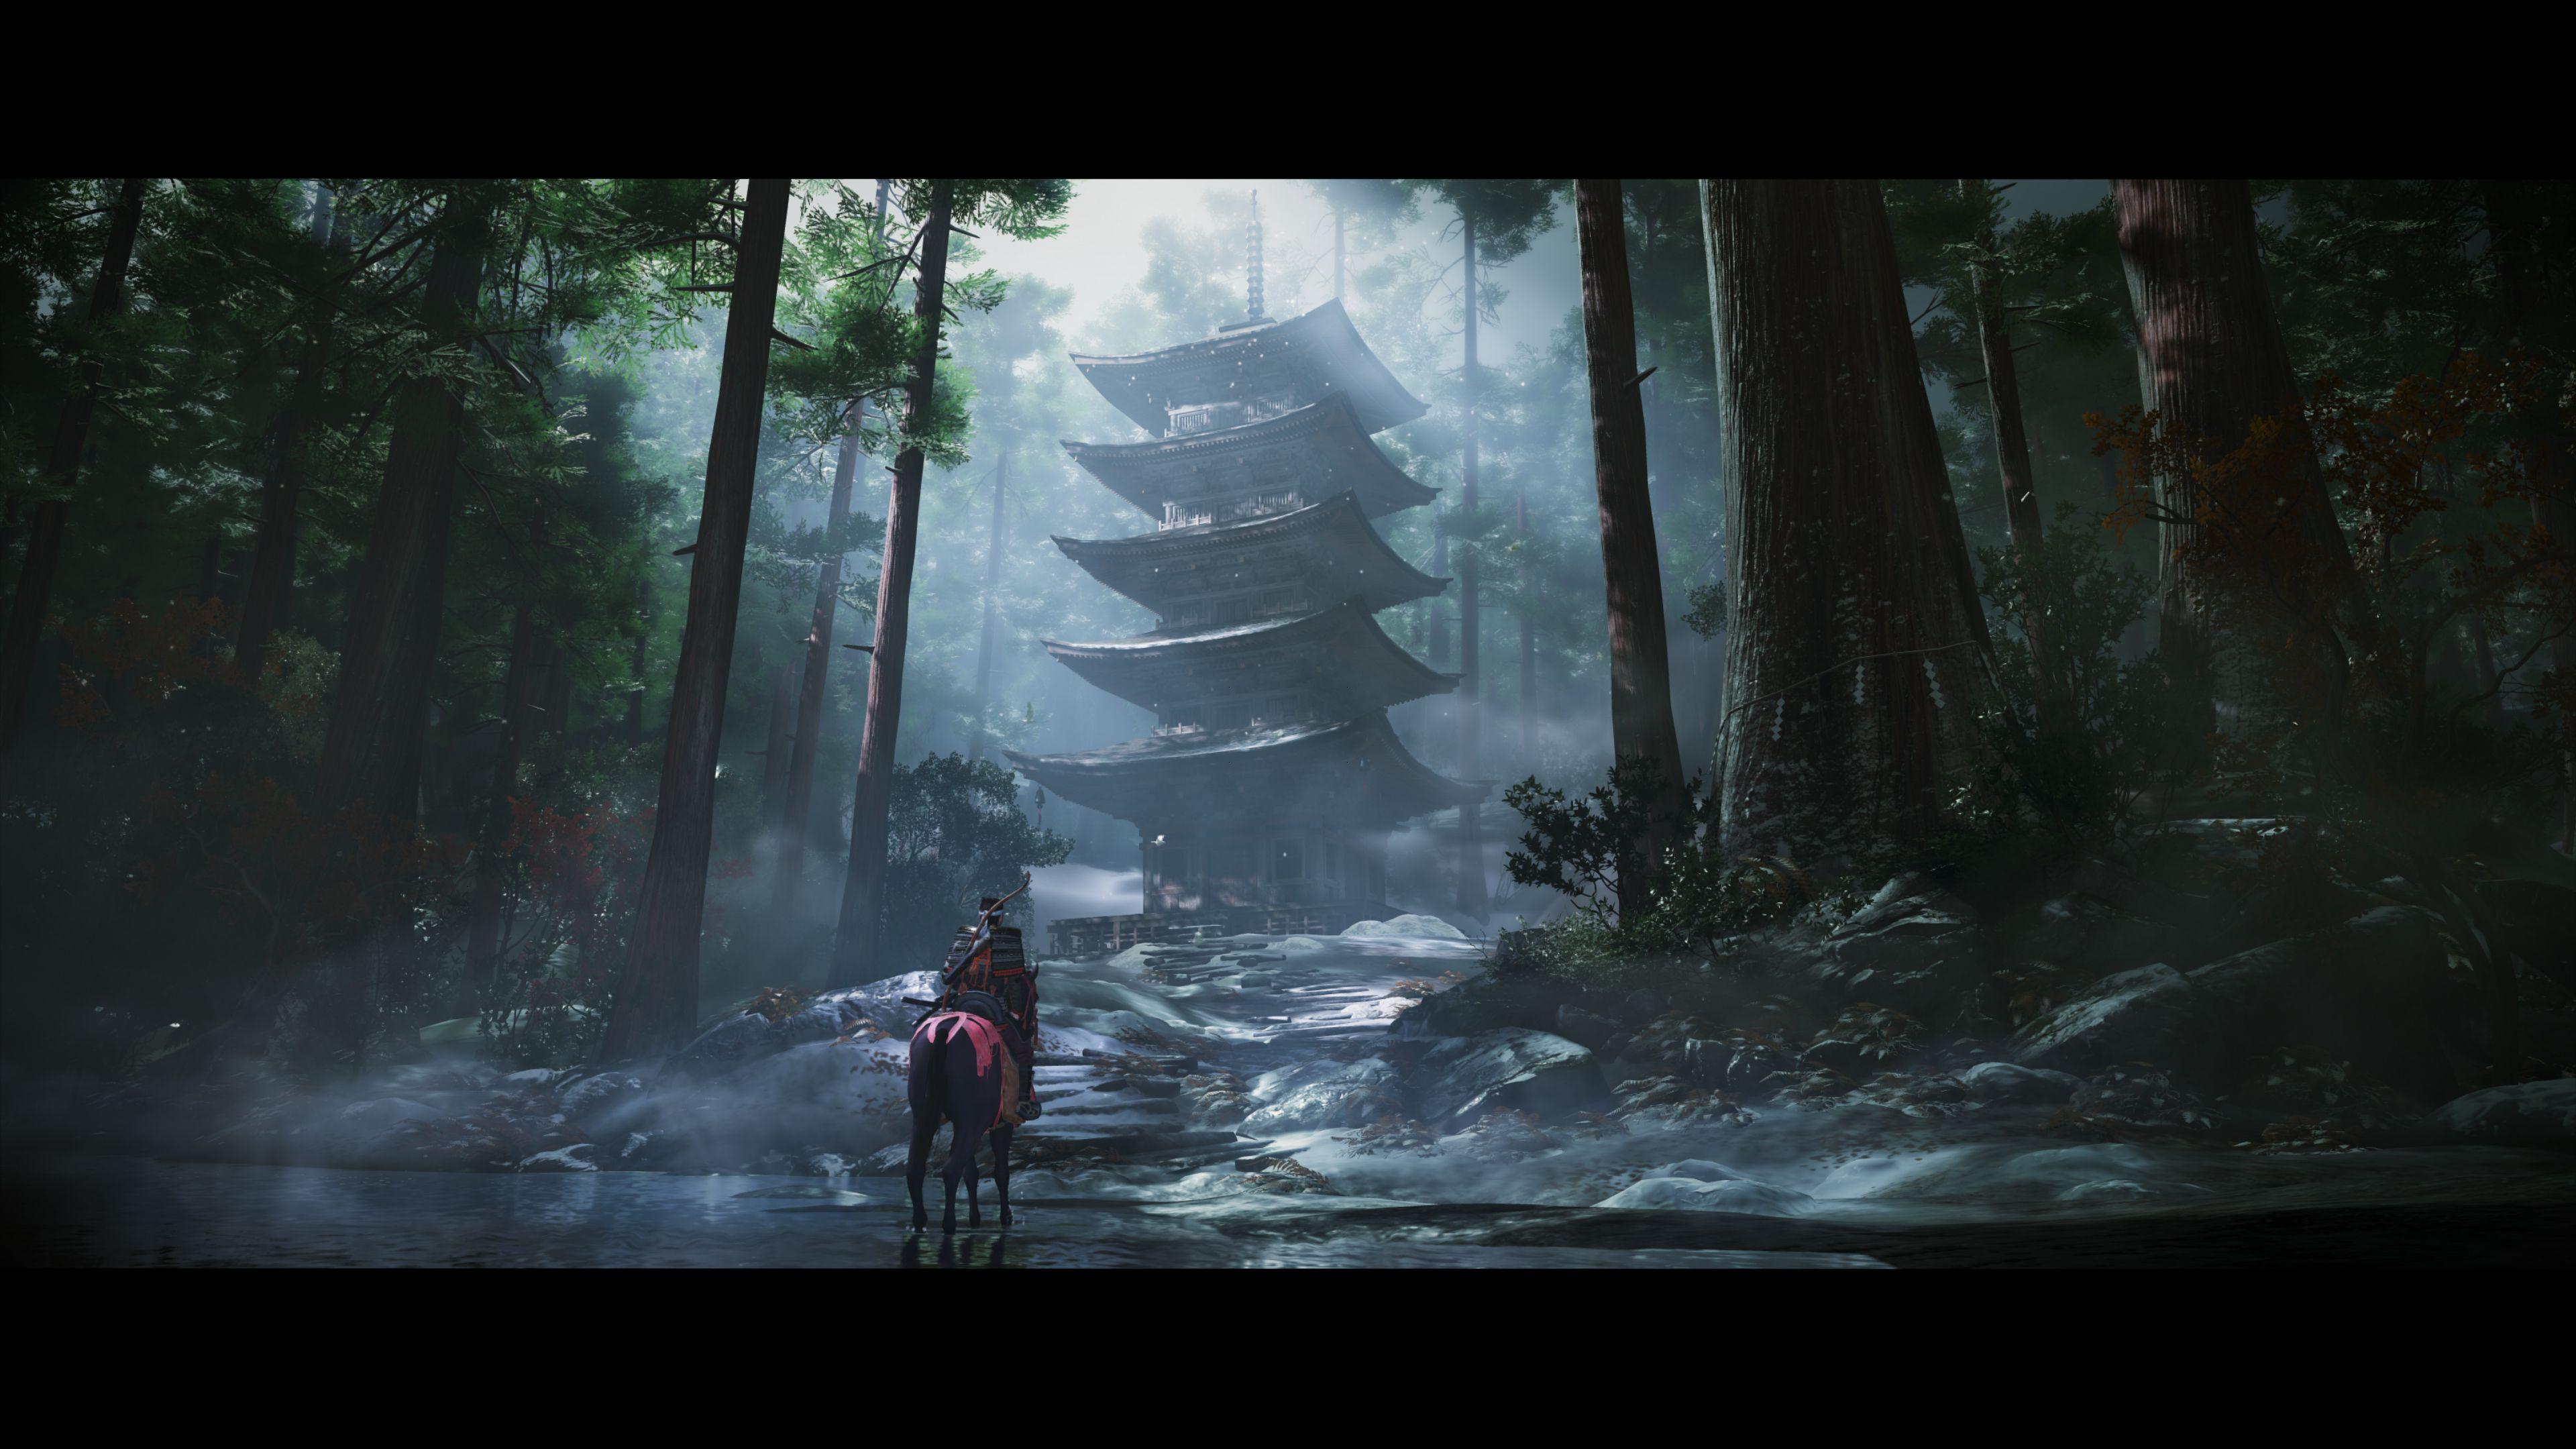 Marie on ghost of tsushima in 2019